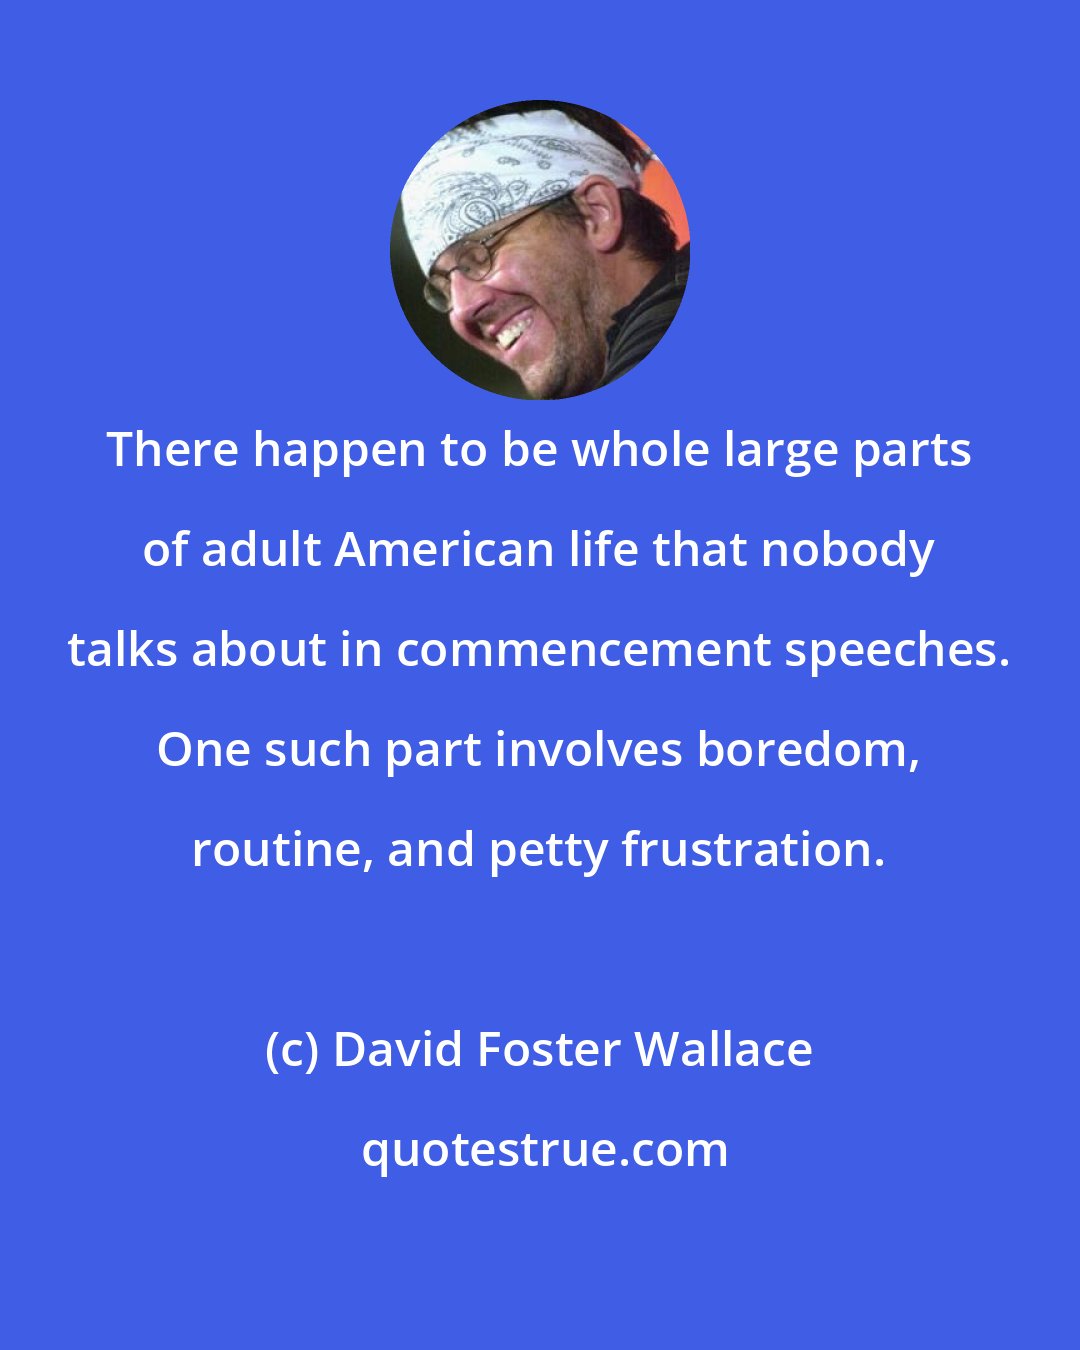 David Foster Wallace: There happen to be whole large parts of adult American life that nobody talks about in commencement speeches. One such part involves boredom, routine, and petty frustration.